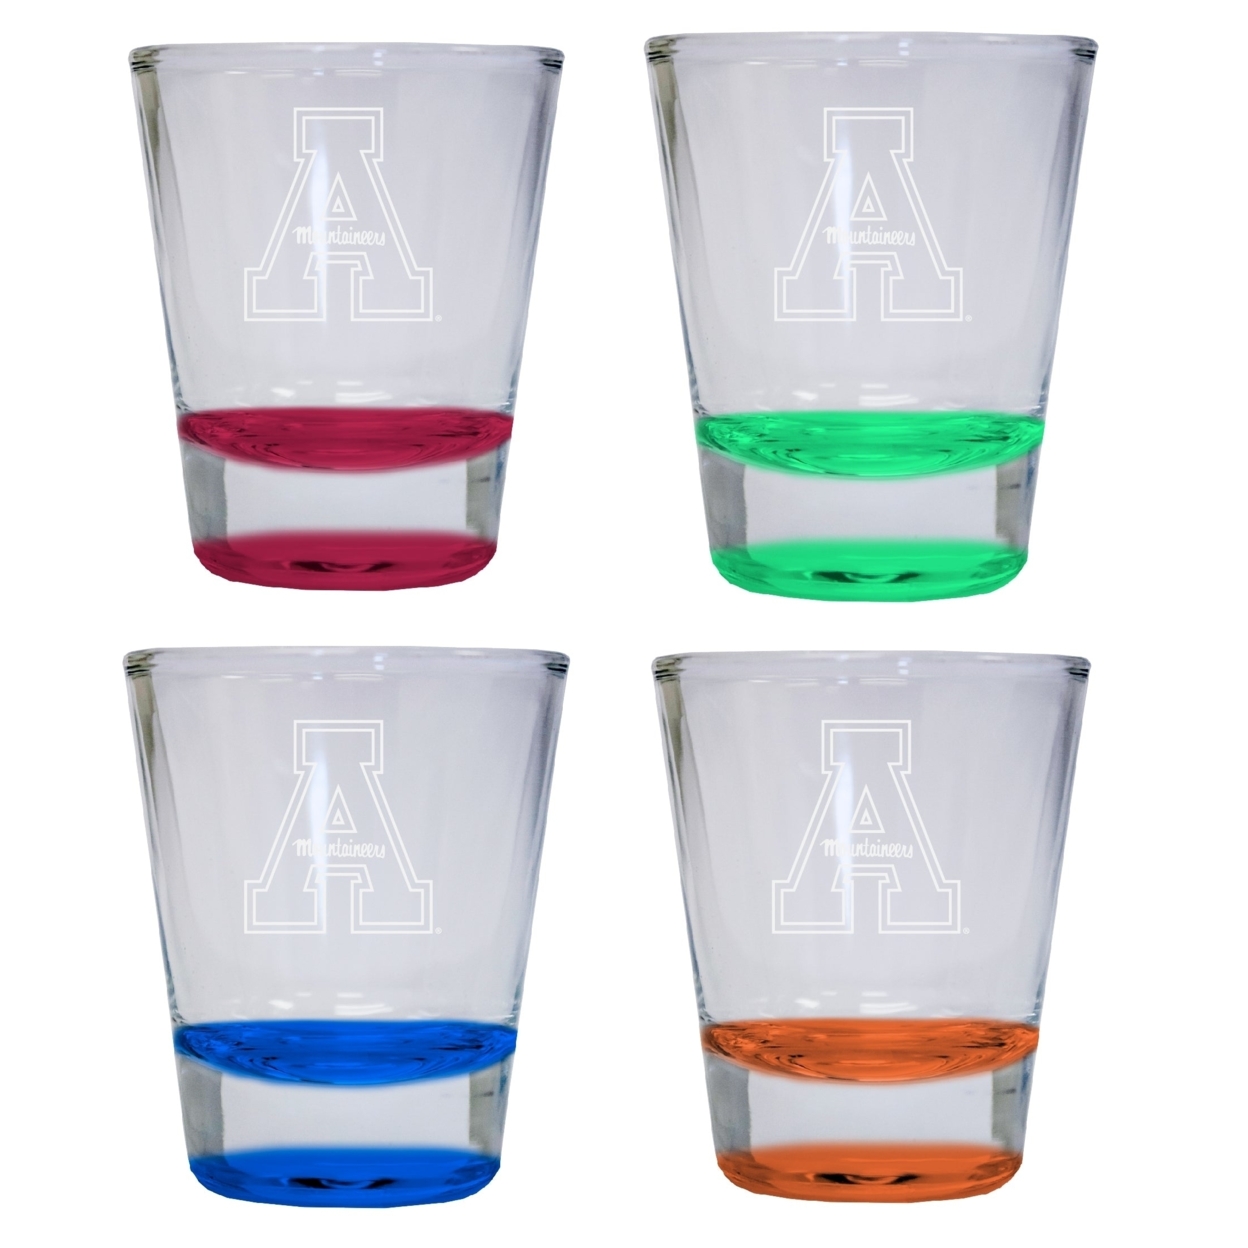 4-Pack Appalachian State Etched Round Shot Glass 2 Oz